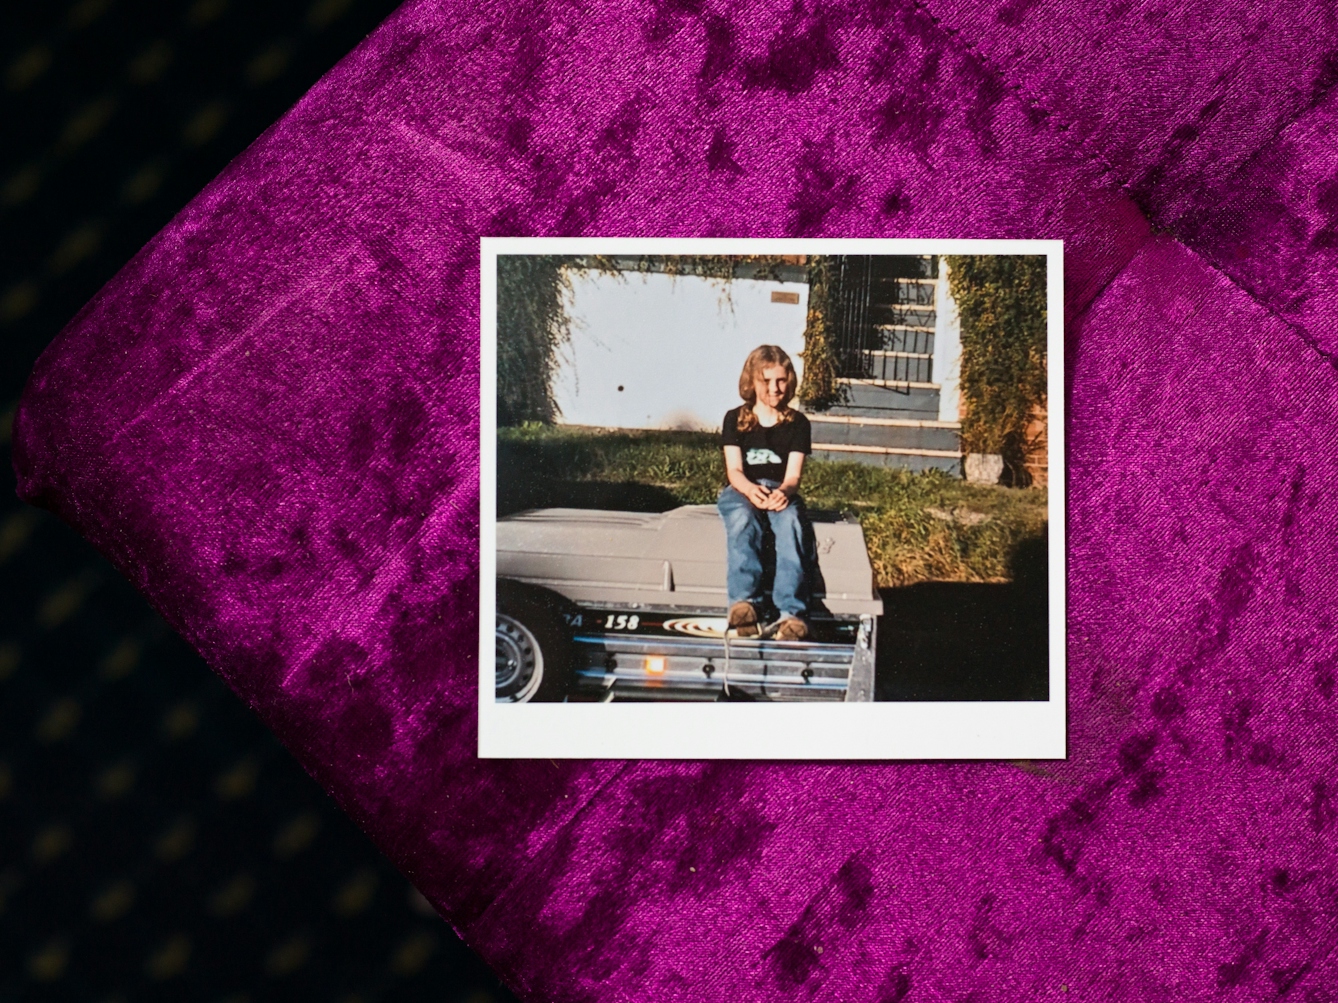 Photograph of print of a family photo of a young girl outside, sitting on the top of a car trailer. She is wearing jeans and a black t-shirt and is smiling to camera. Behind her is a grassy bank next to the road and the front white garden wall, gate and steps of a house. The print is lying on top of a purple velvet fabric which is part in shade, part in sunlight.